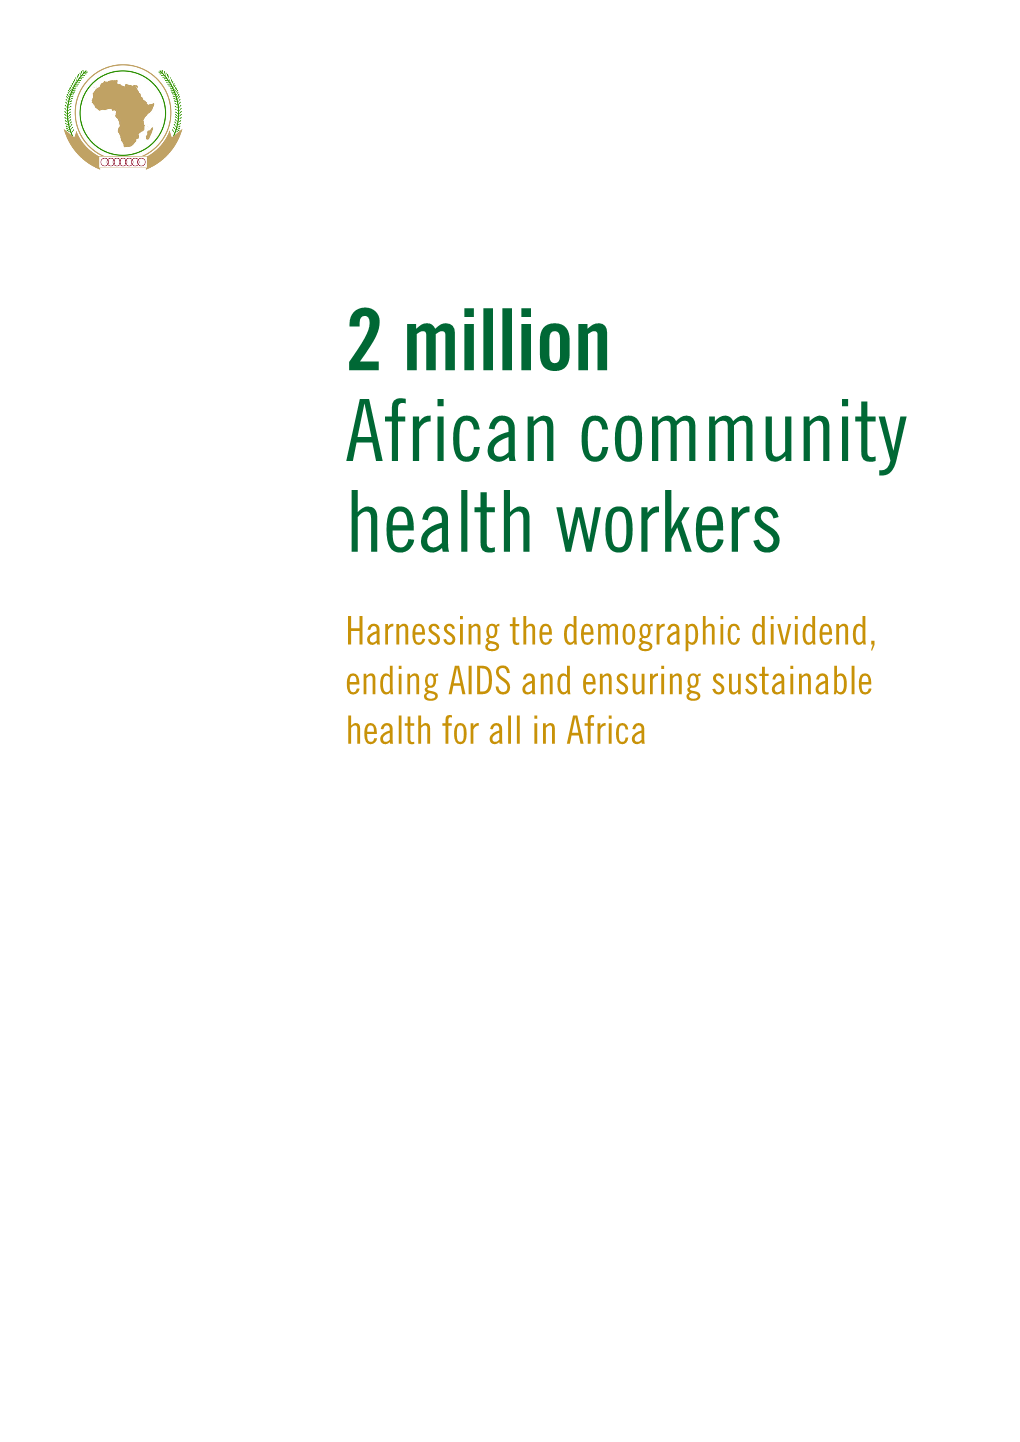 2 Million African Community Health Workers